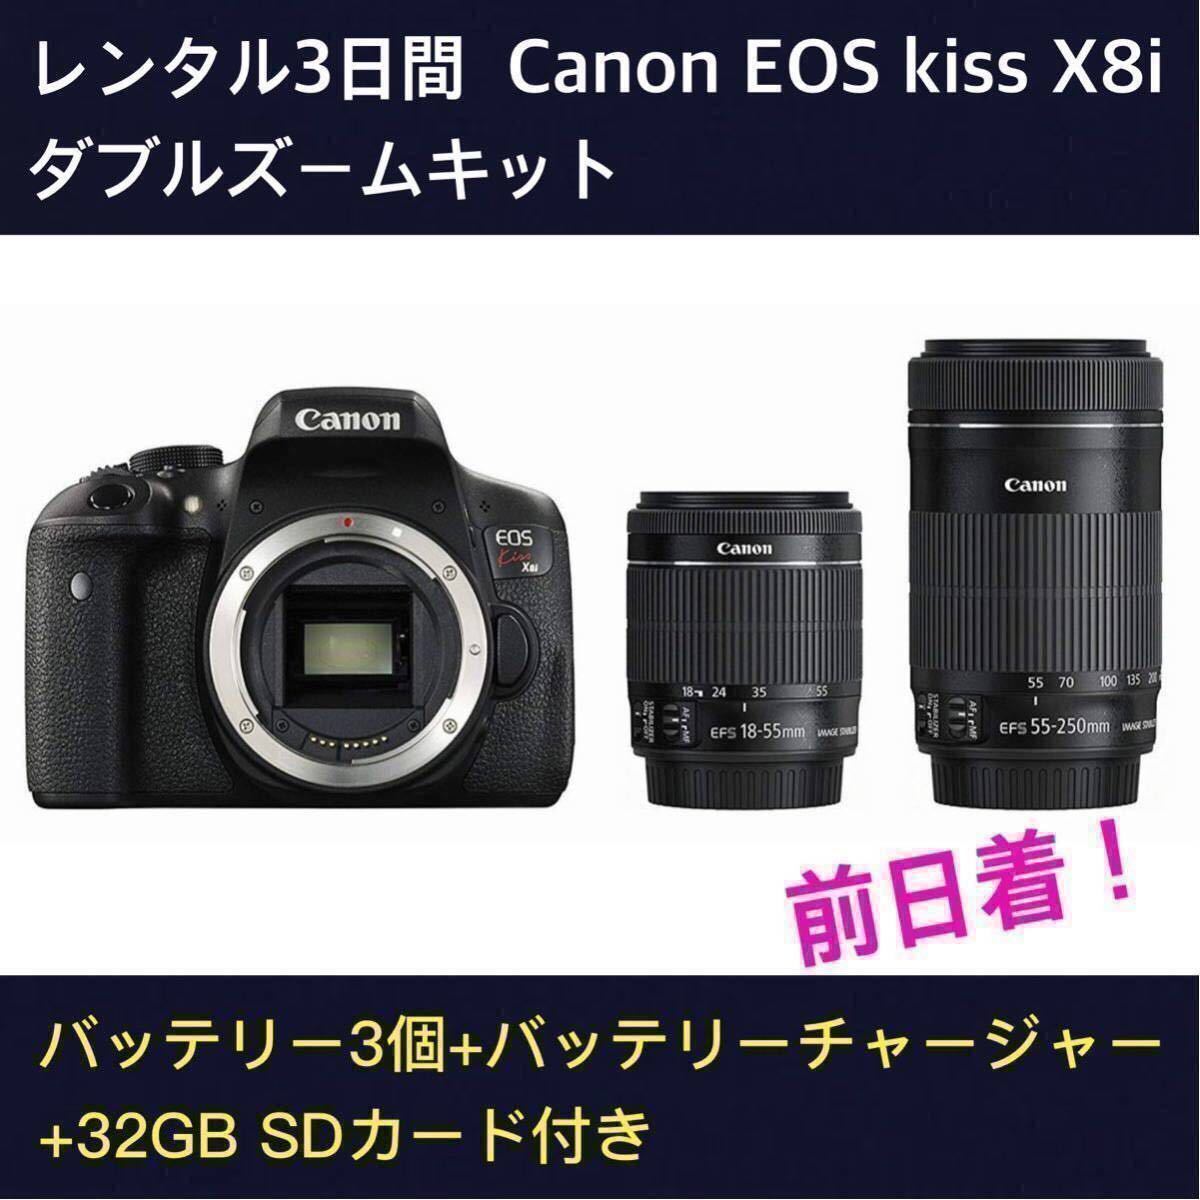 Canon EOS Kiss X8i ダブルズームキット 8170枚-